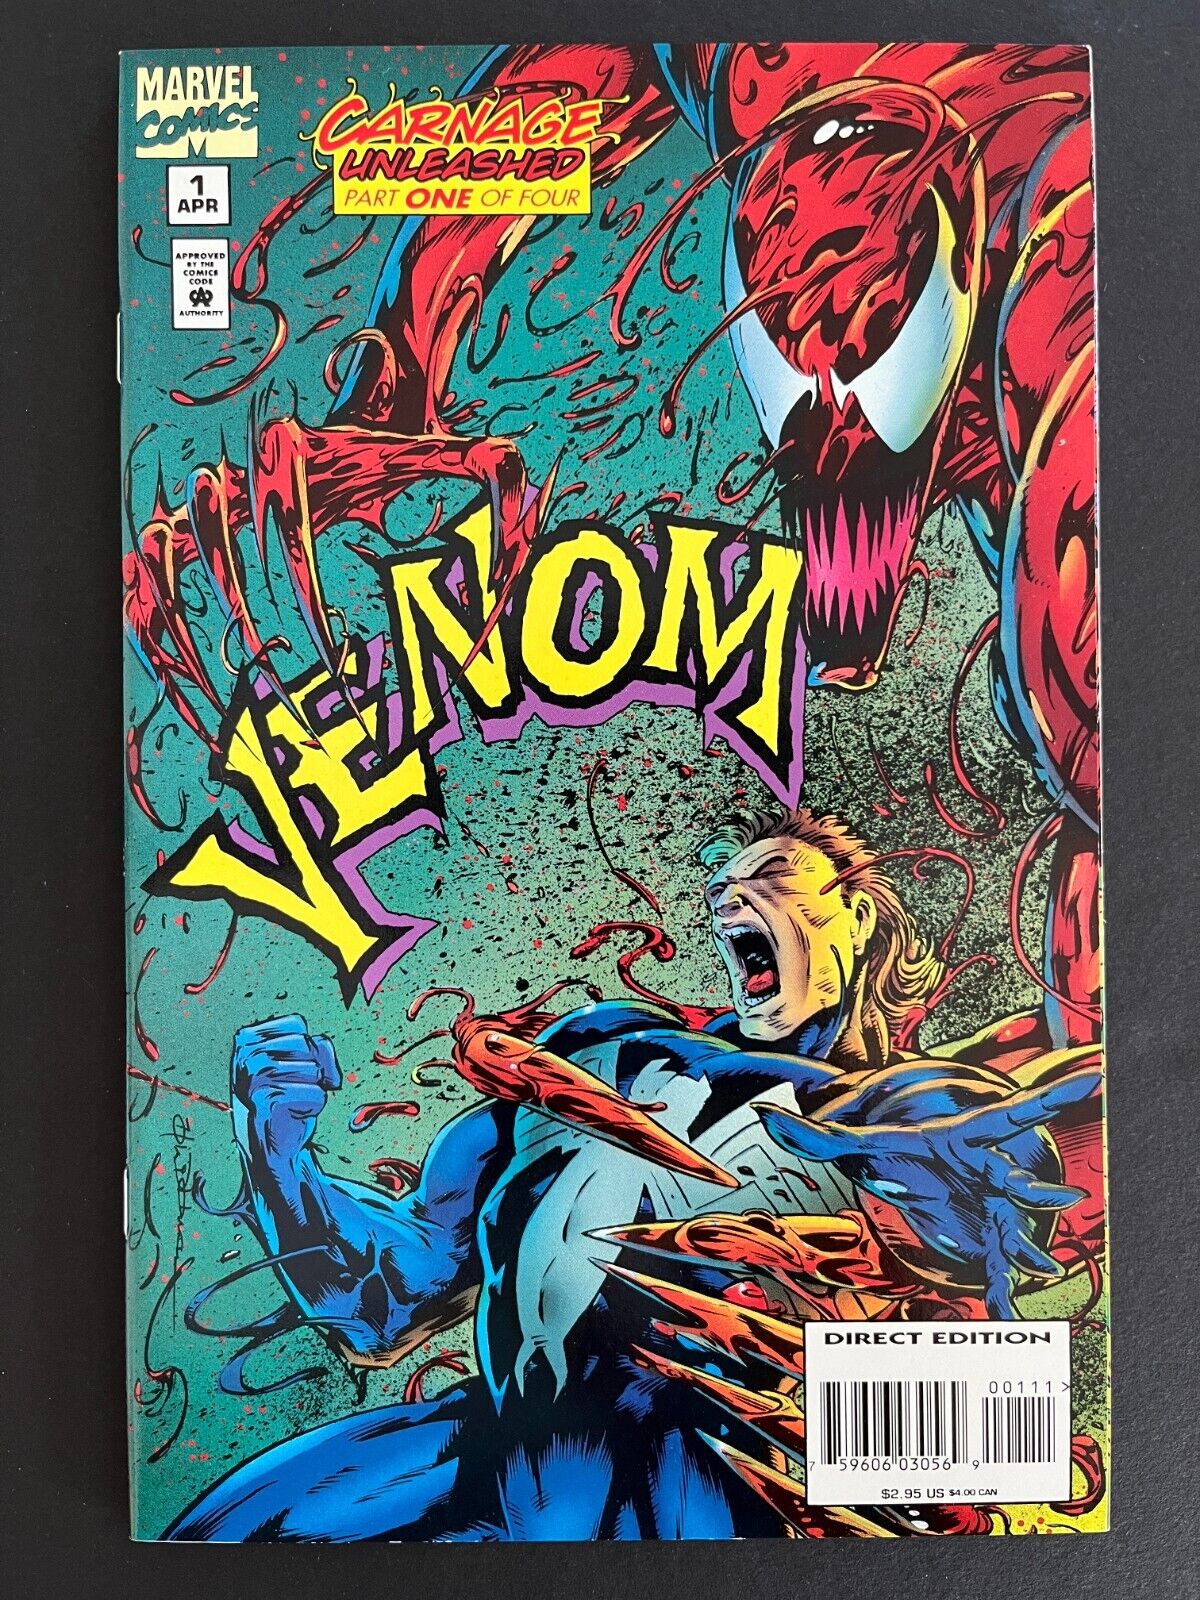 Venom: Carnage Unleashed #1-#4 SINGLE ISSUES (Marvel, 1995) COMBINE SHIPPING